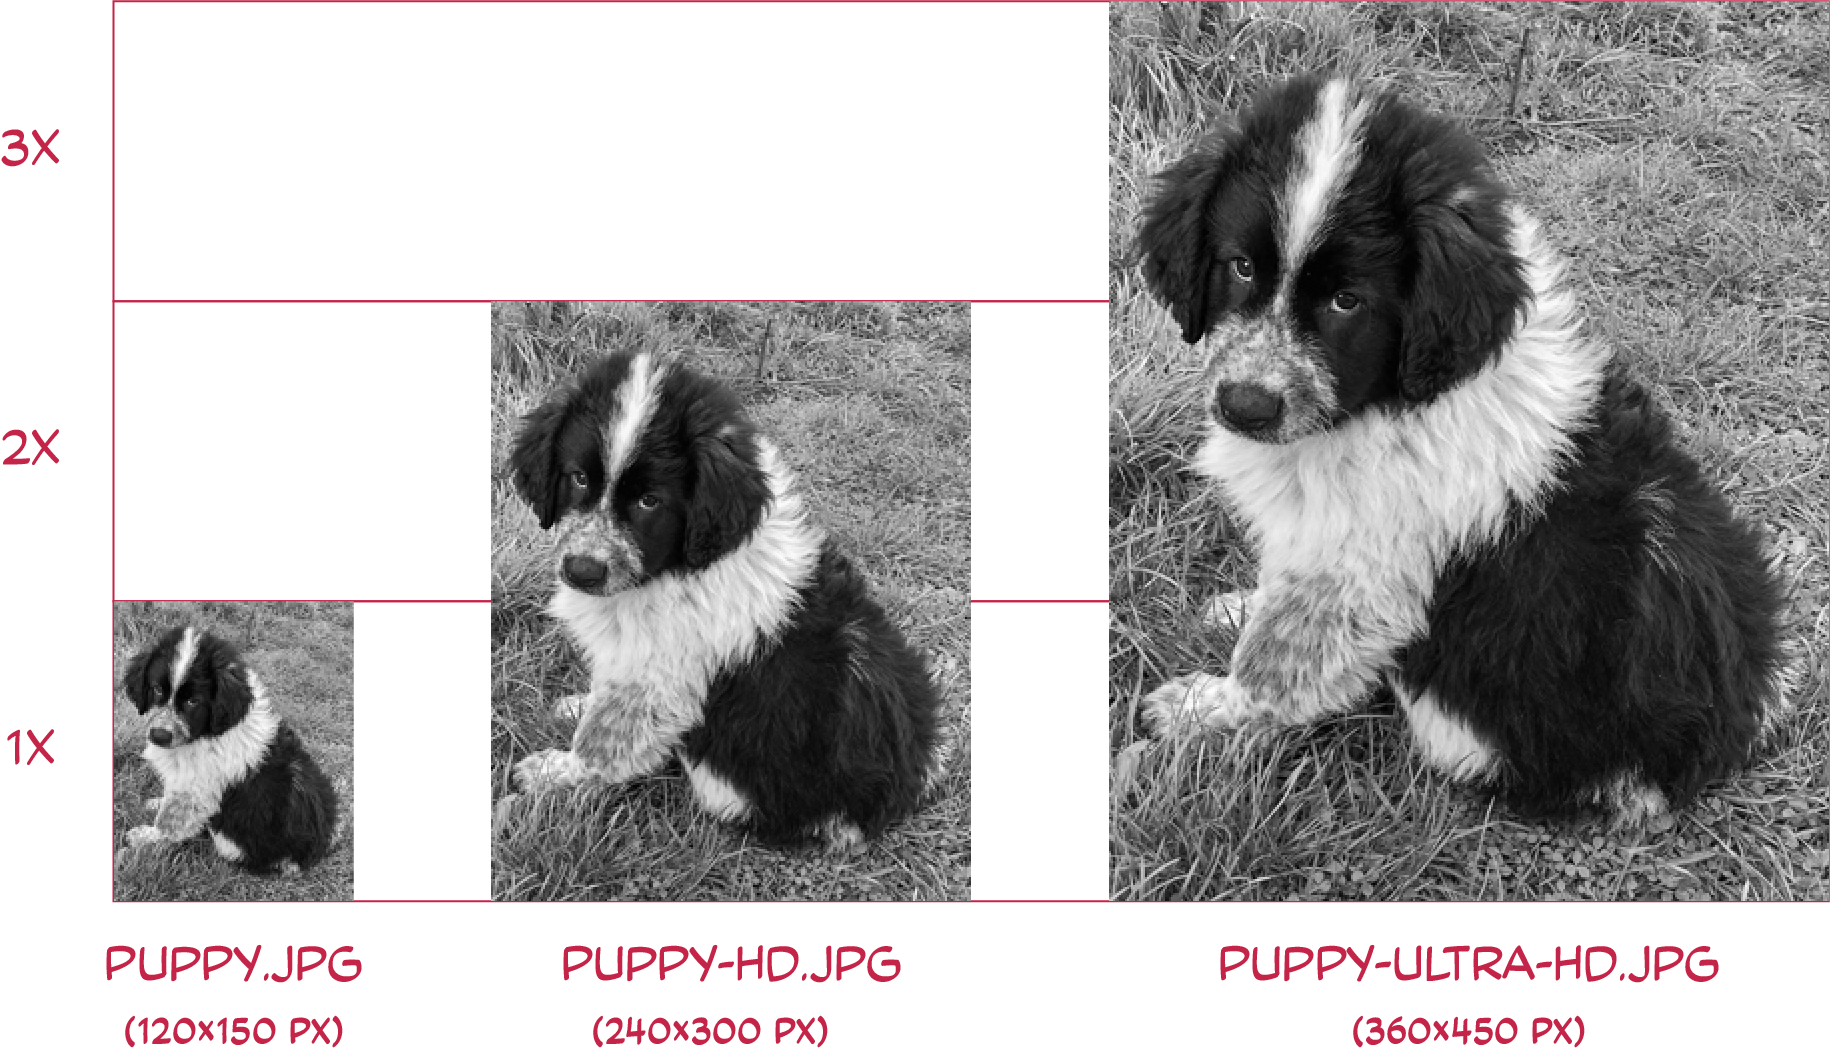 The same image of our pupper at three different scales, one next to each other